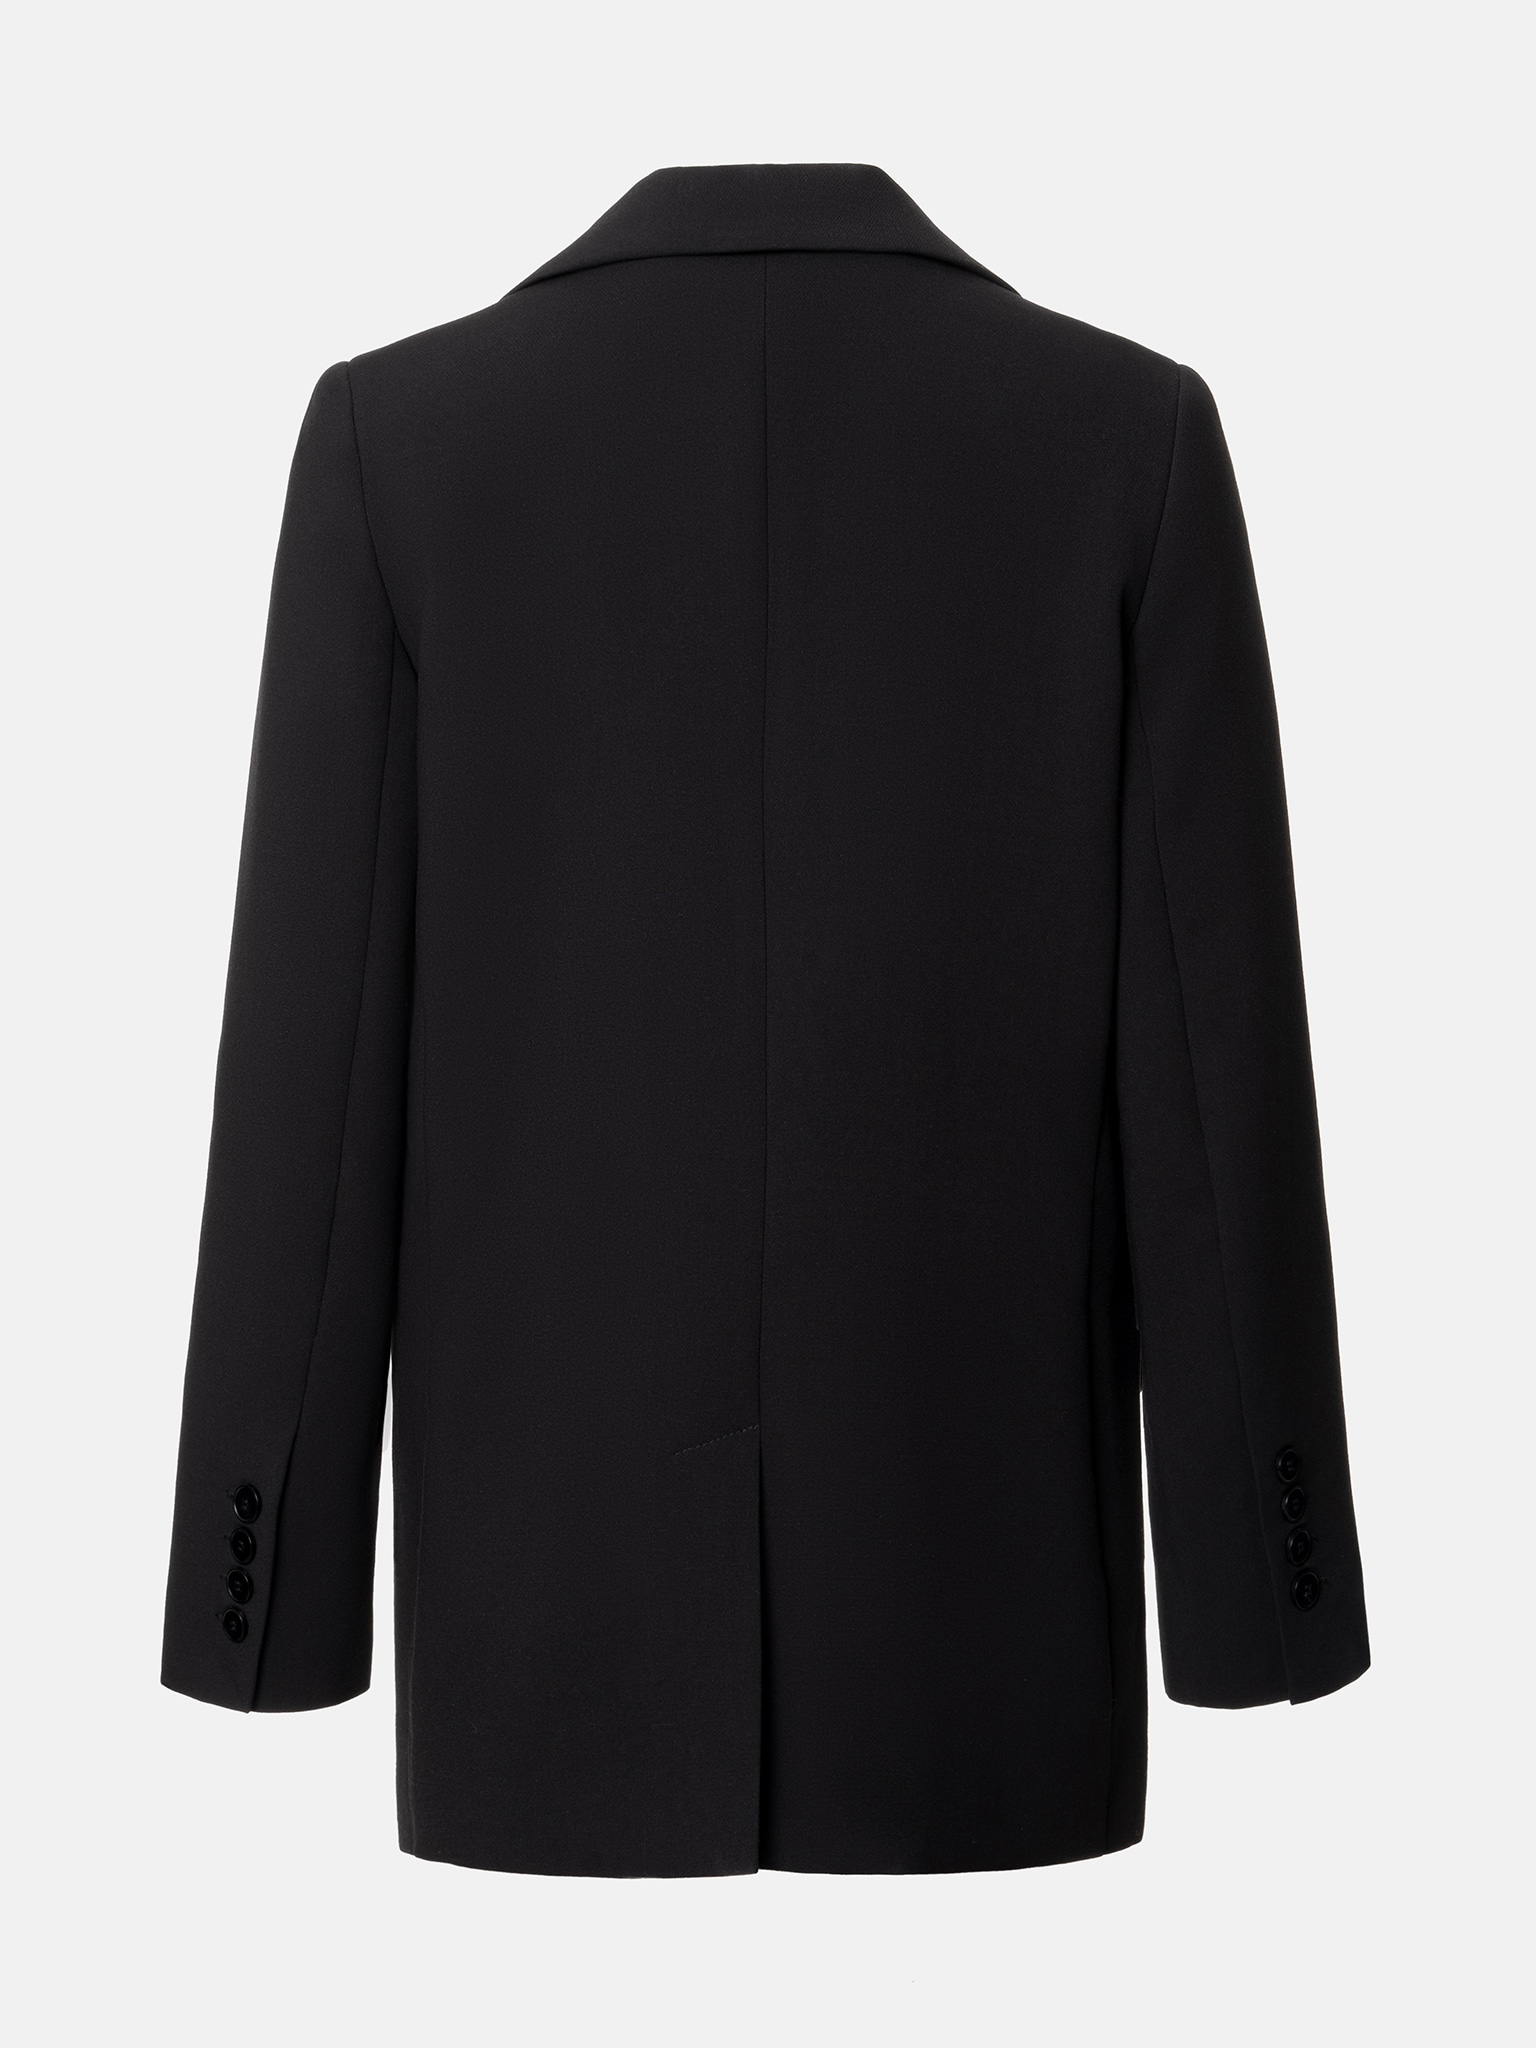 Straight single-breasted suit blazer